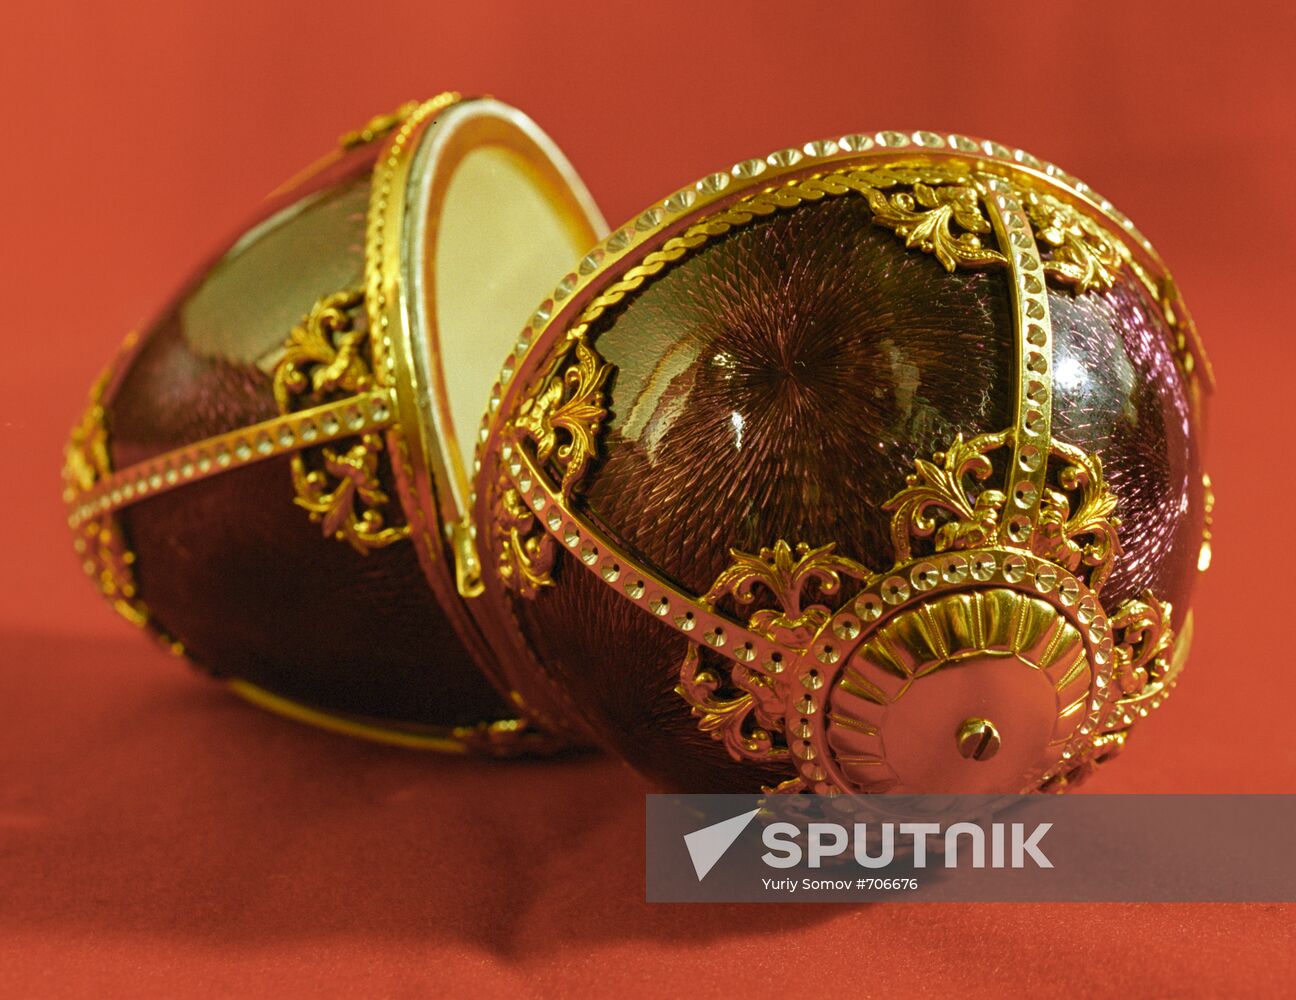 An Easter egg of Faberge